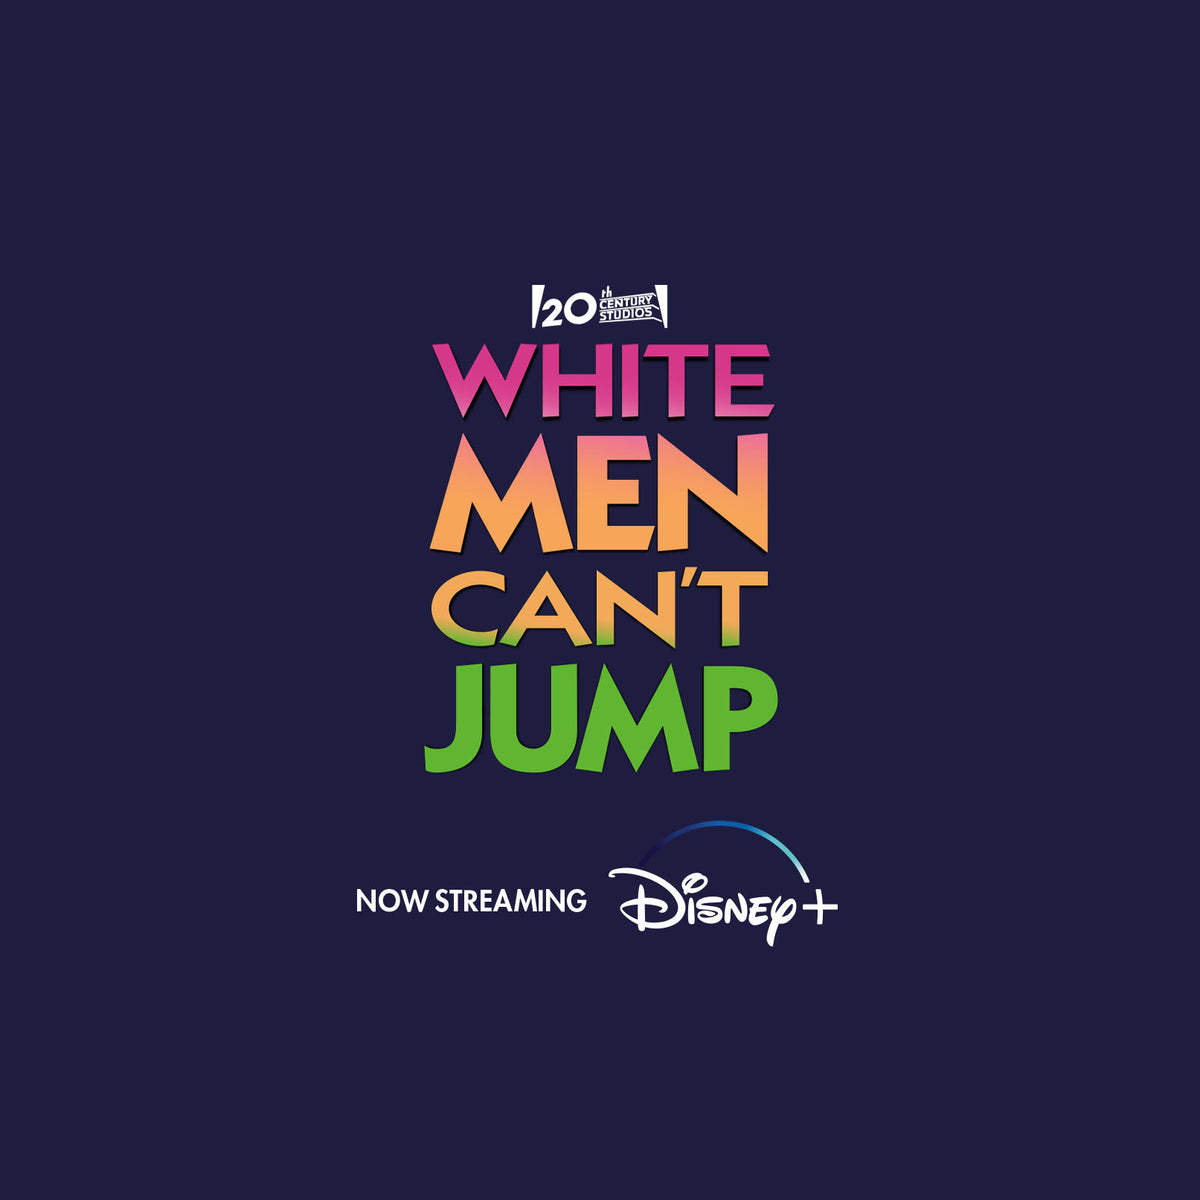 20th Century Studios’ 'White Men Can't Jump' Revisits a Cult-Classic, Now Streaming on Disney+